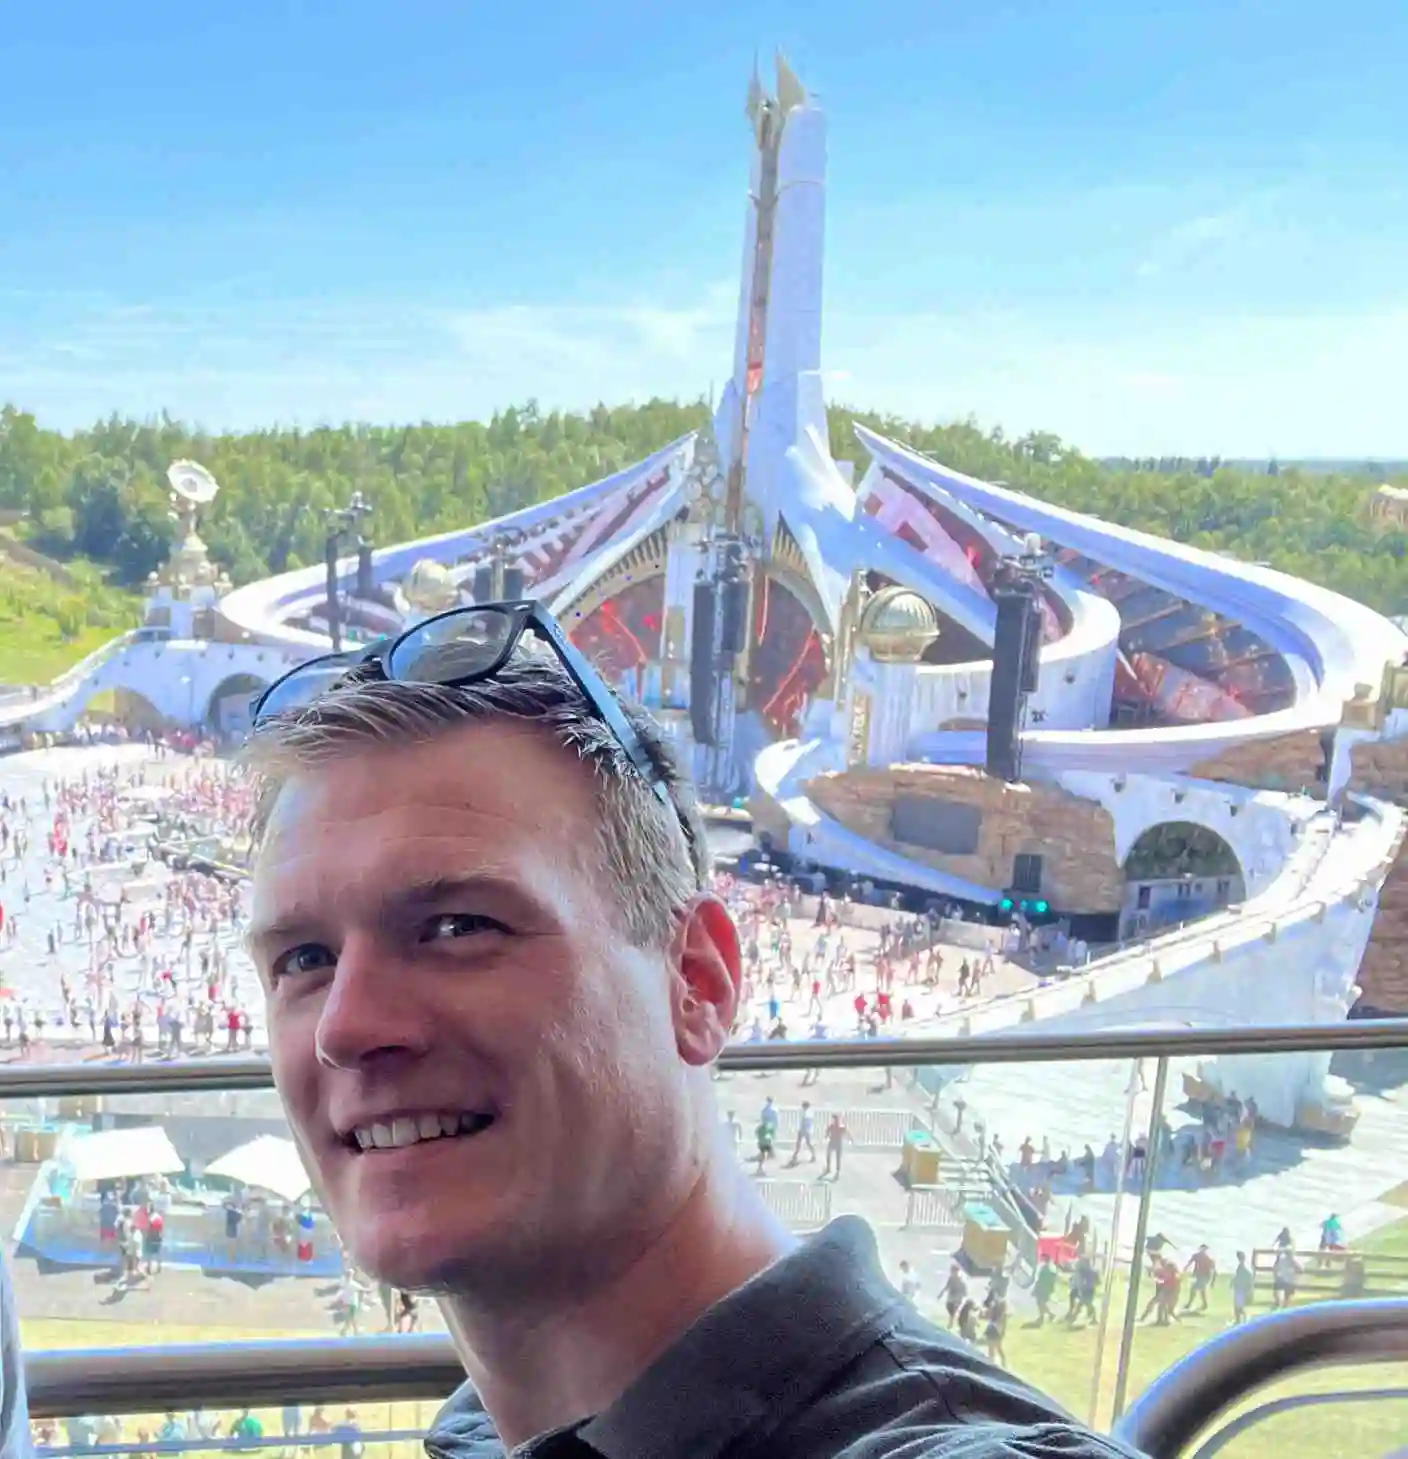 Music2Move founder, Glen Sels at Tomorrowland